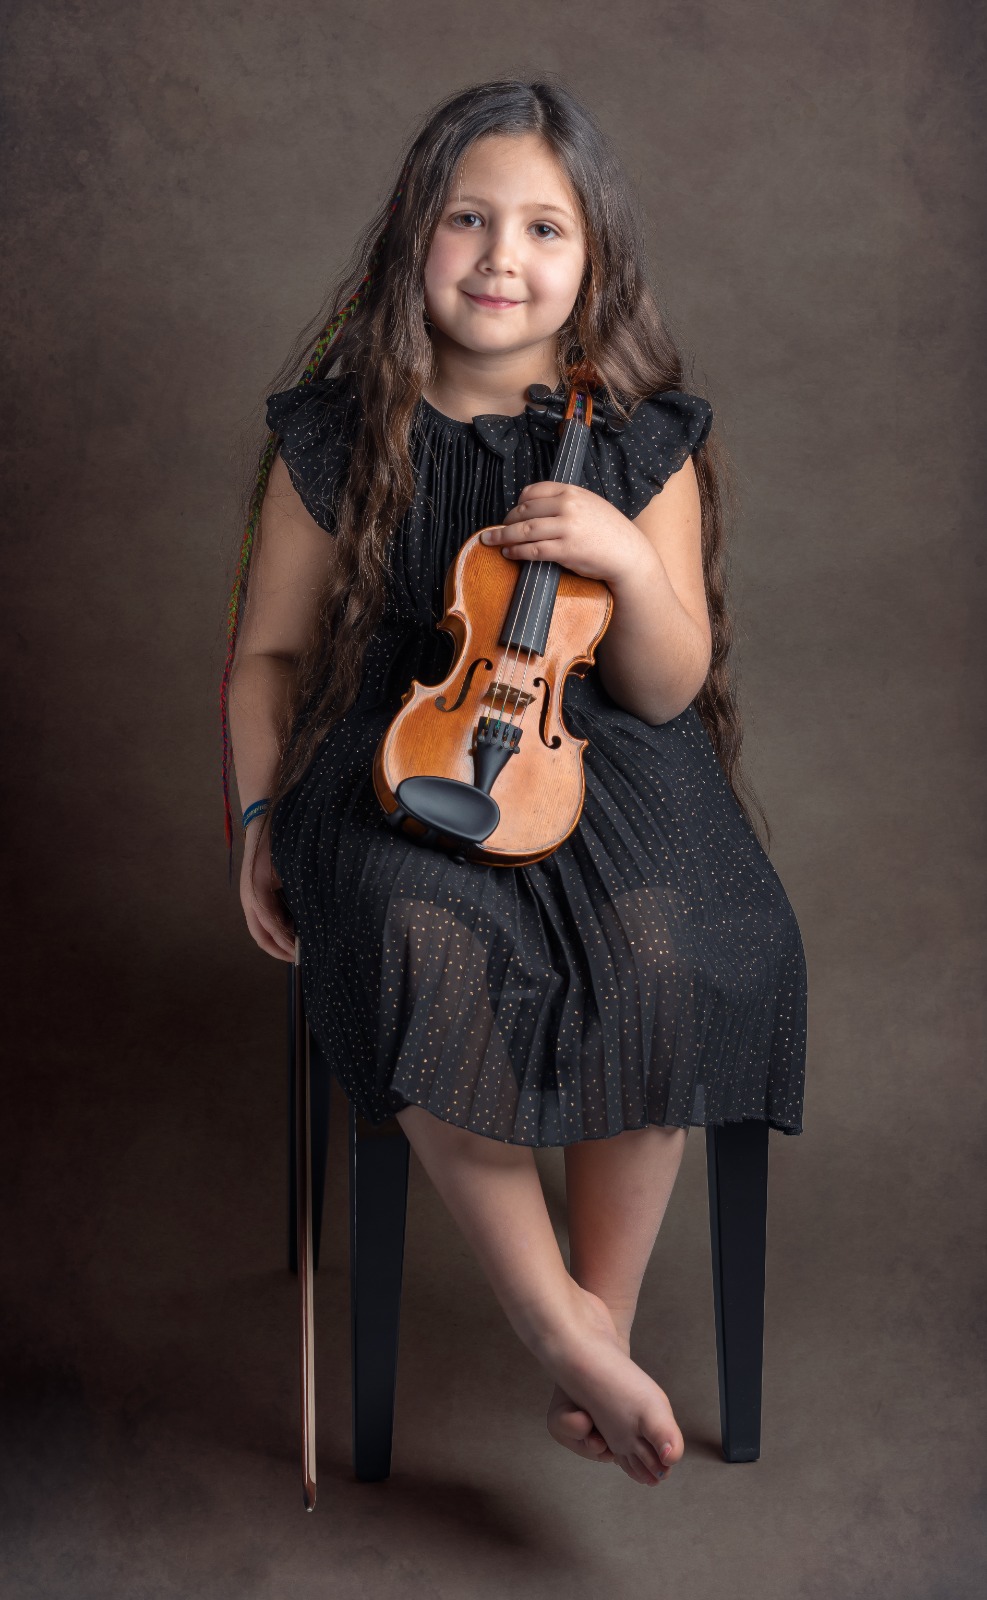 Child with her violin